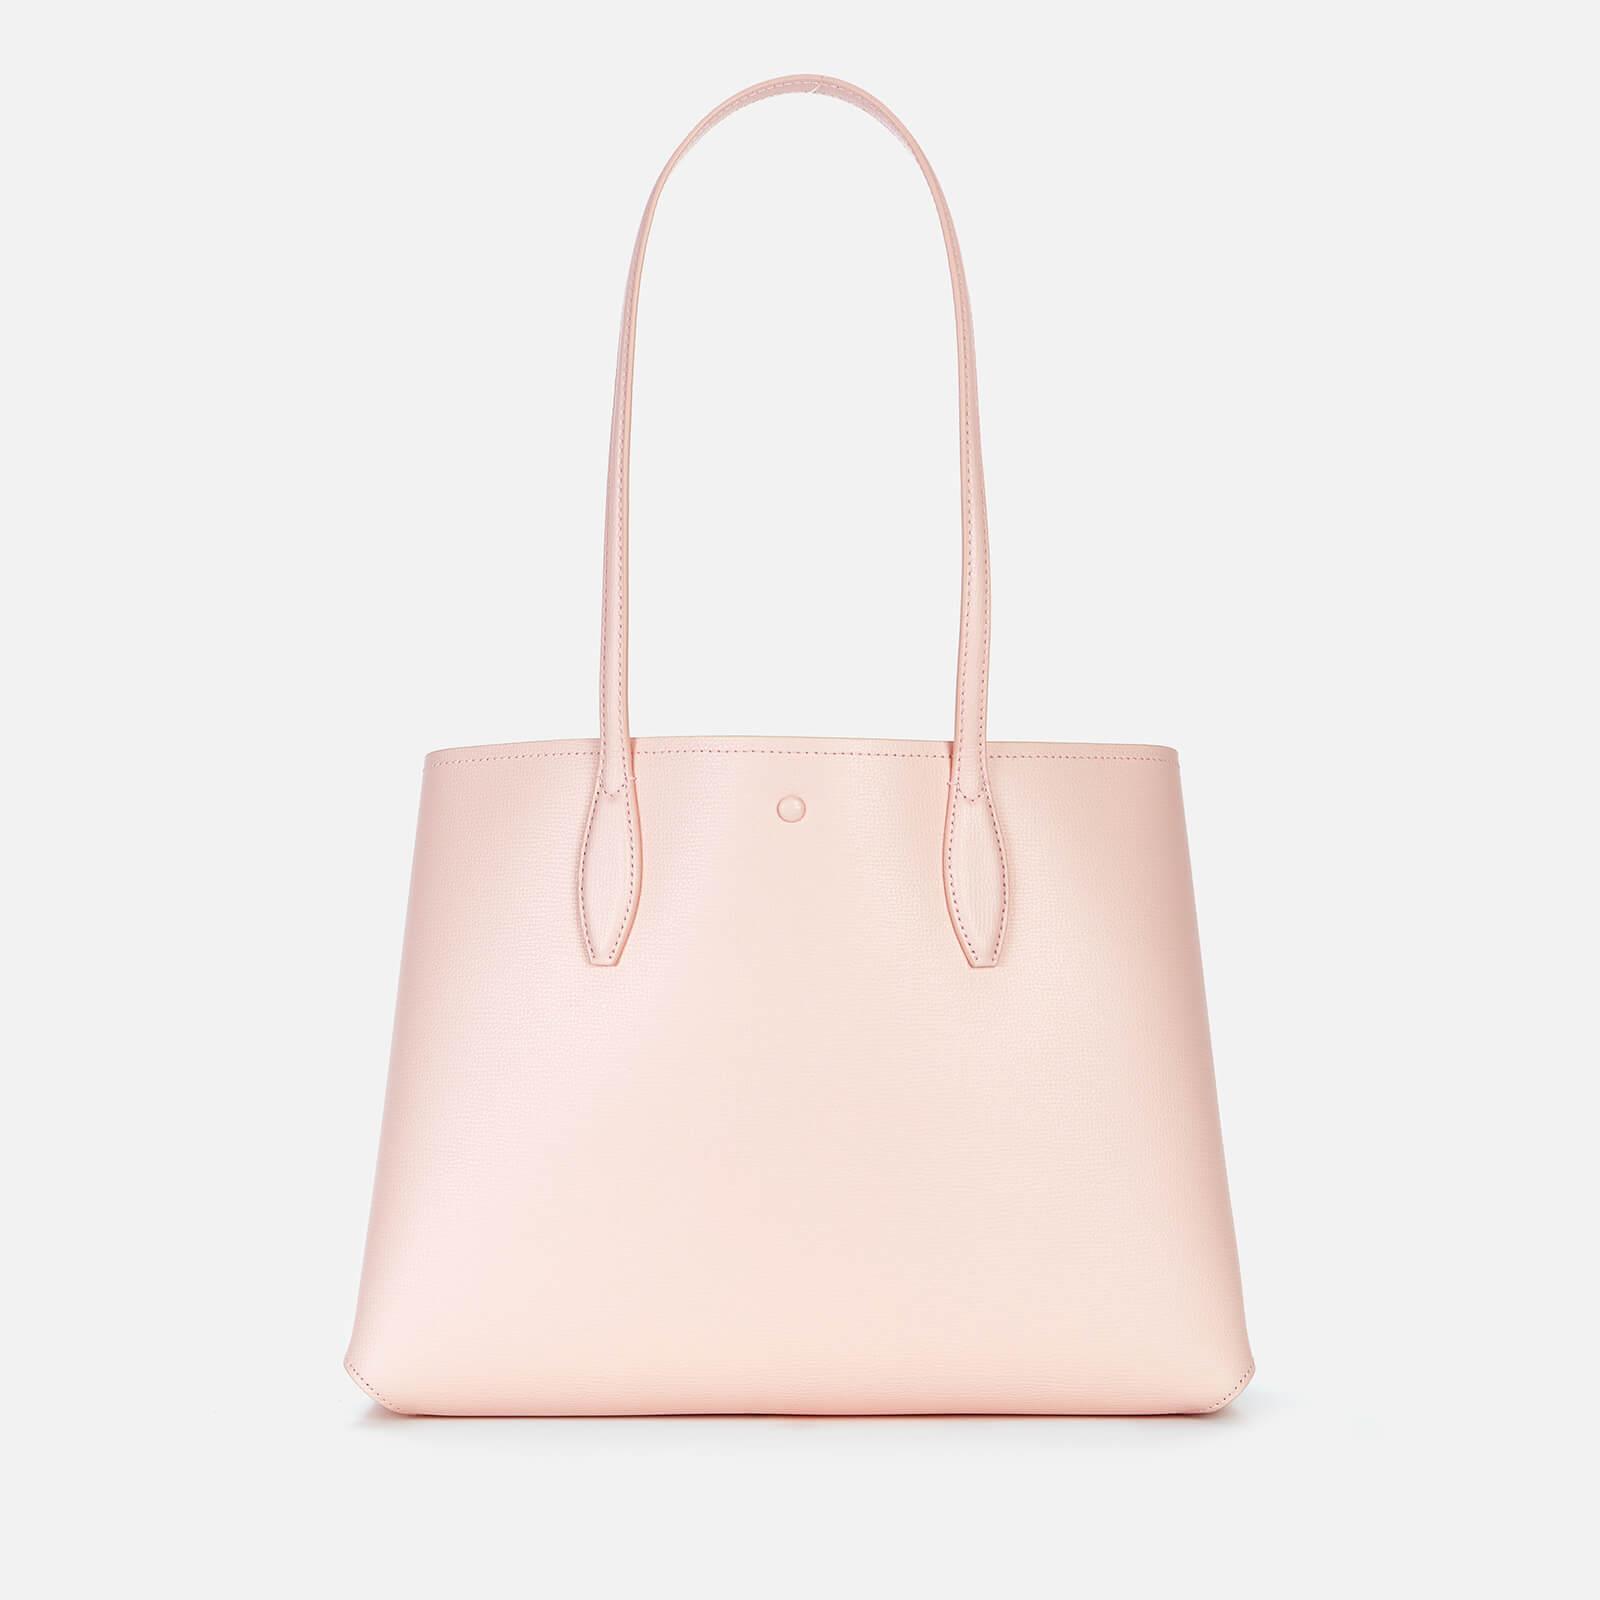 Kate Spade All Day Large Tote Bag in Light Pink (Pink) - Lyst